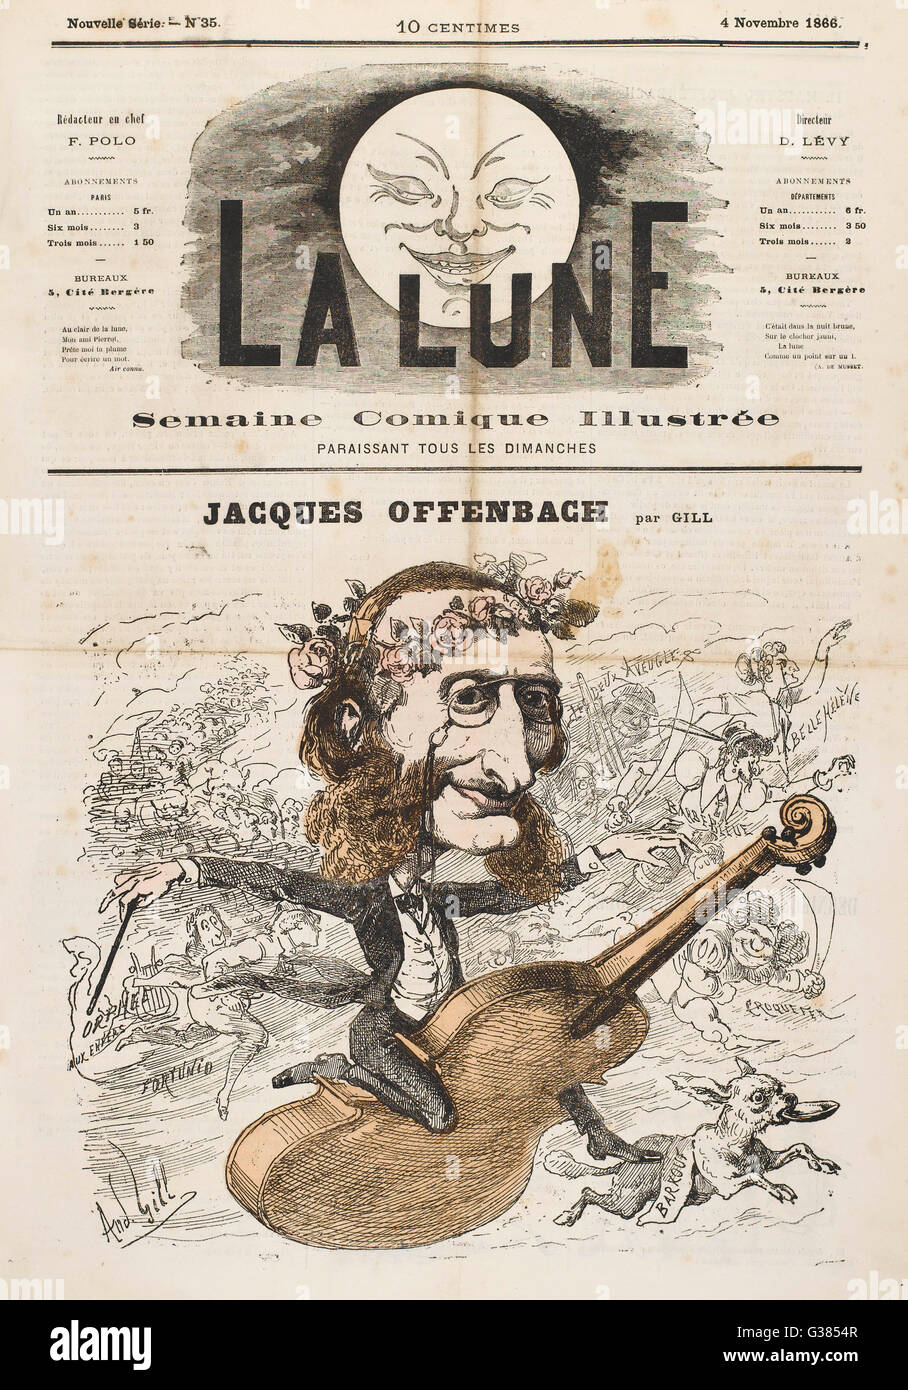 JACQUES OFFENBACH musicista francese data: 1819 - 1880 Foto Stock